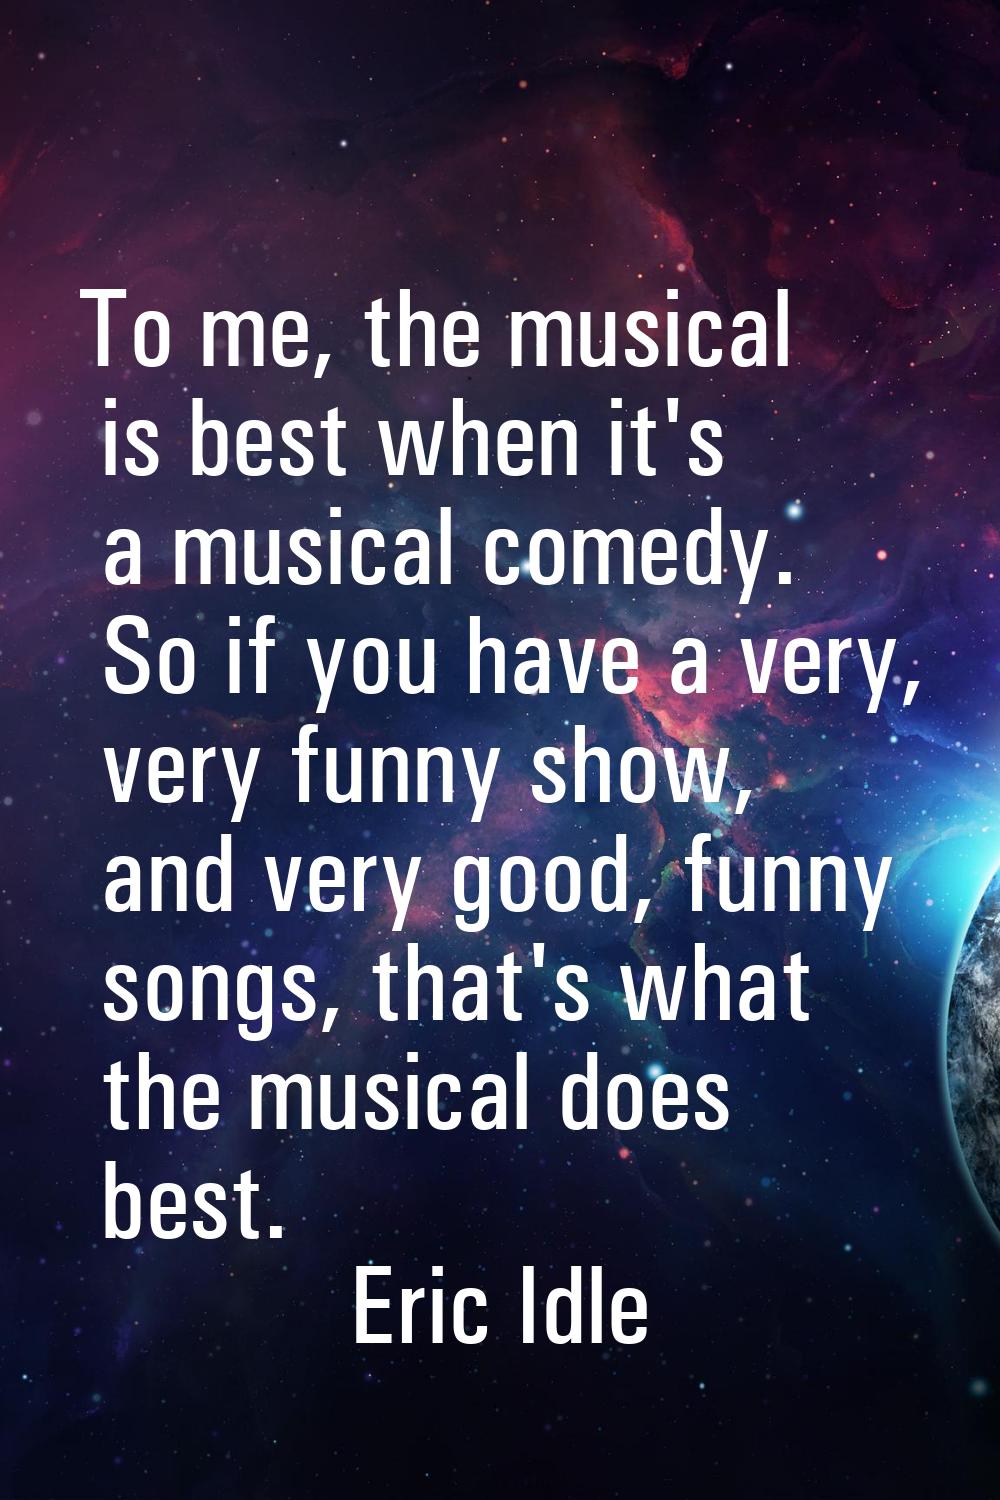 To me, the musical is best when it's a musical comedy. So if you have a very, very funny show, and 